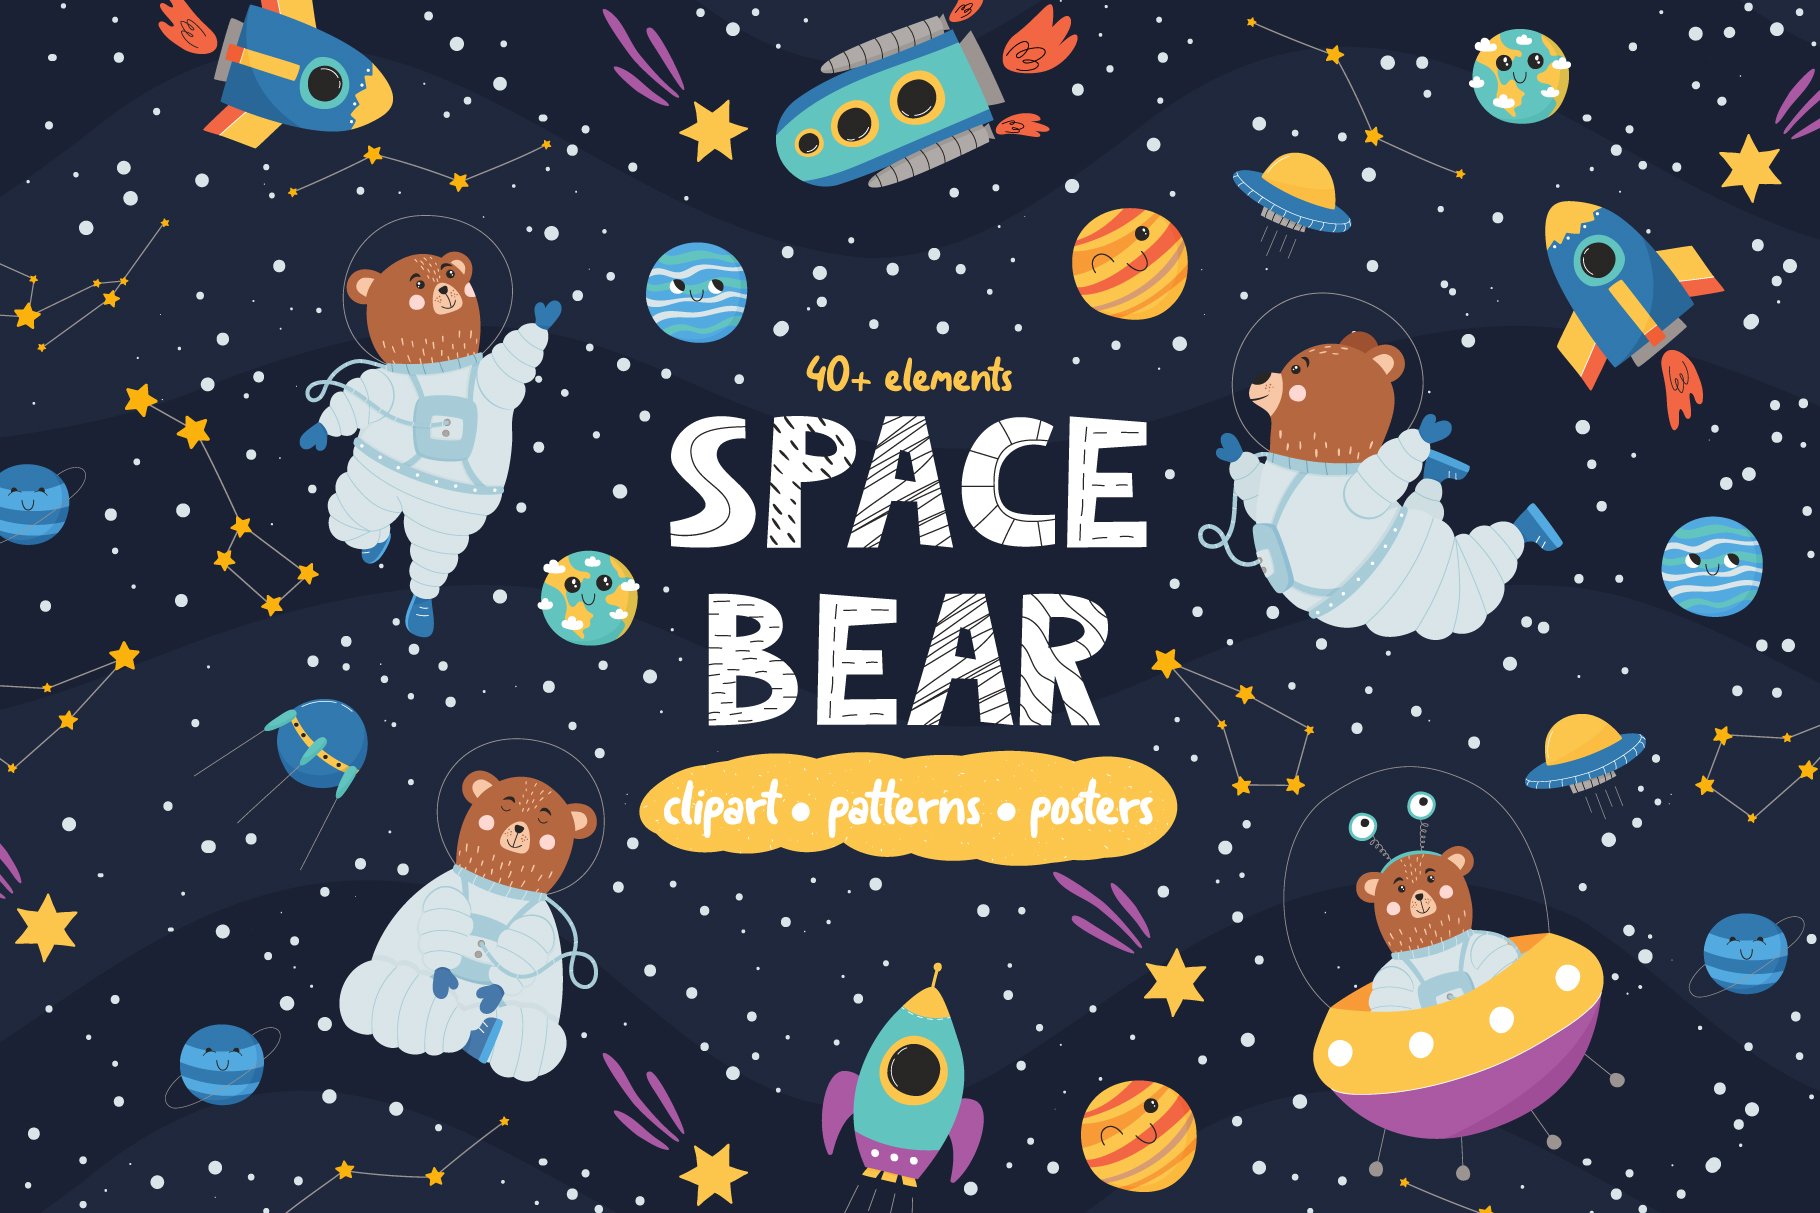 Cute Space Bear clipart & pattern cover image.